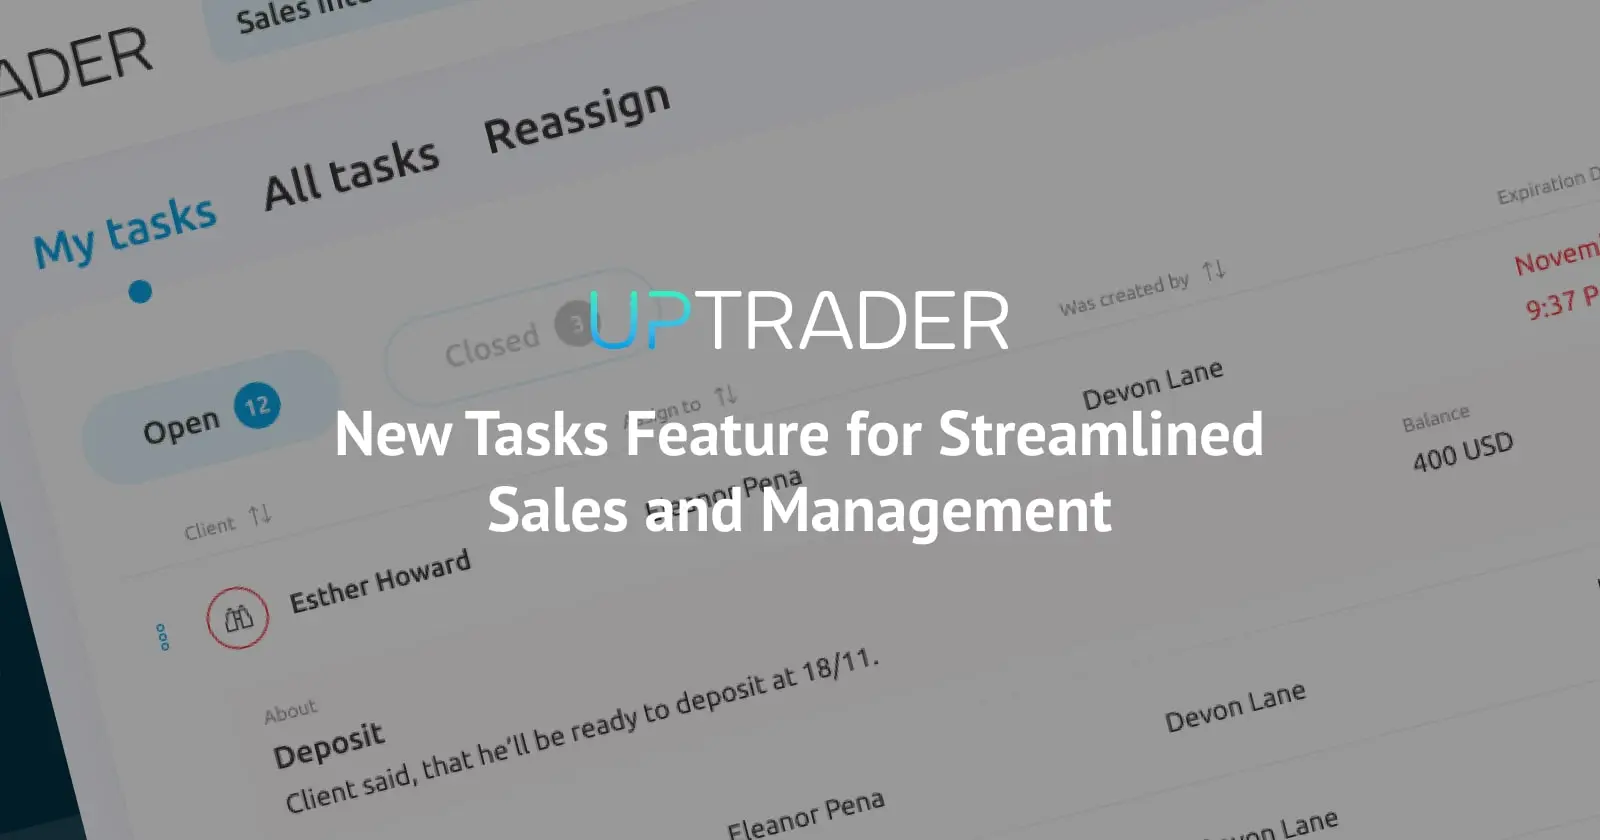 New Tasks Feature for Streamlined Sales and Management